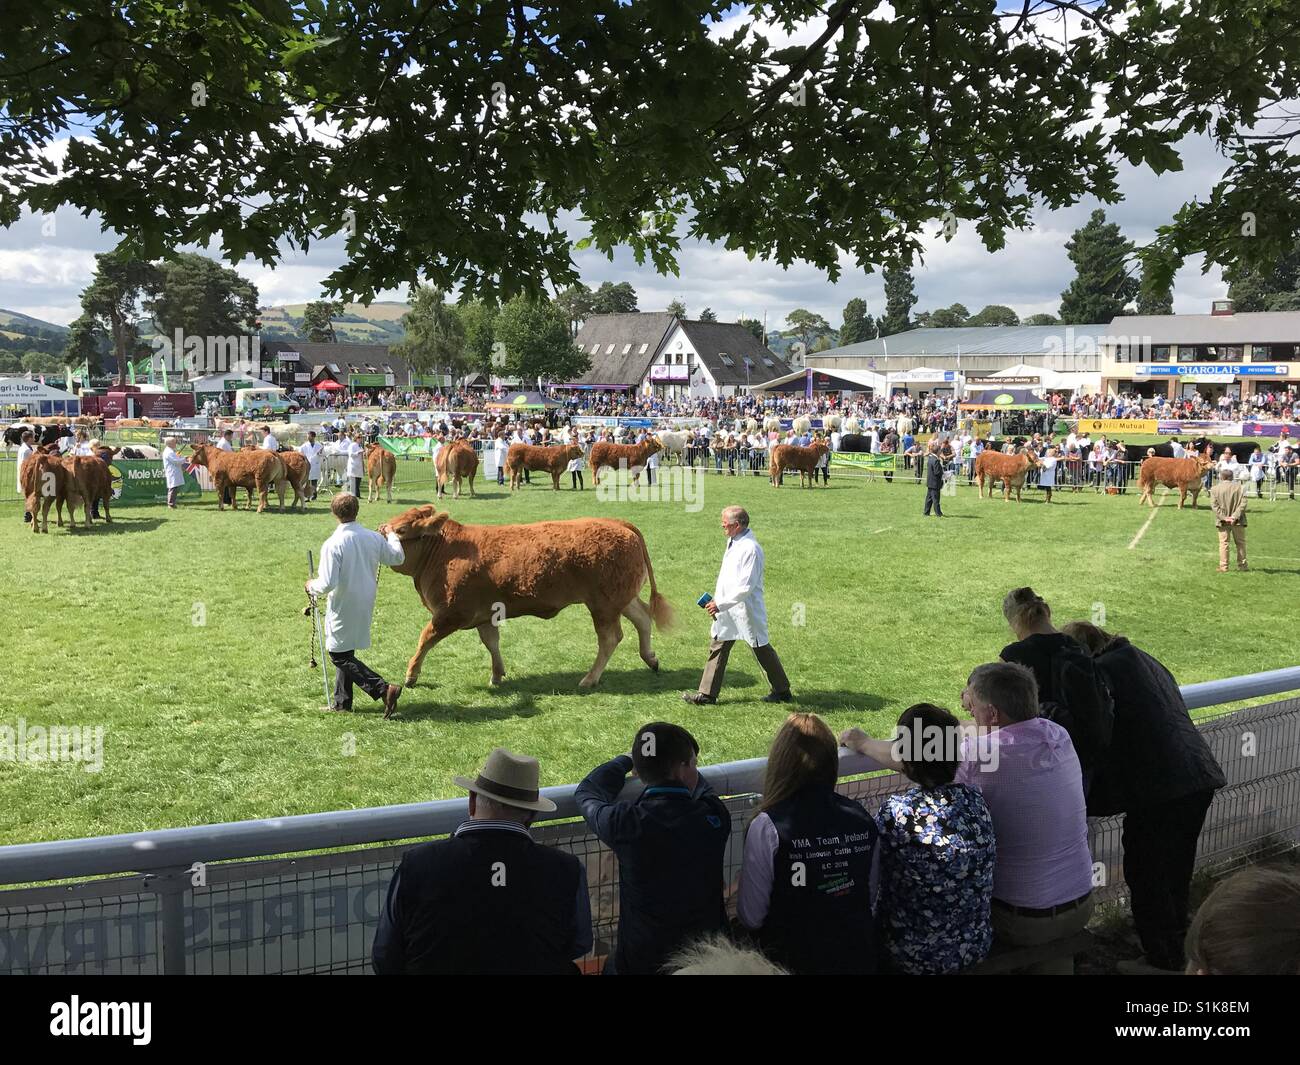 Judging of cattle at the 2017 Royal Welsh Show, Builth Wells, Wales, UK, one of the largest agricultural shows in Europe. Stock Photo